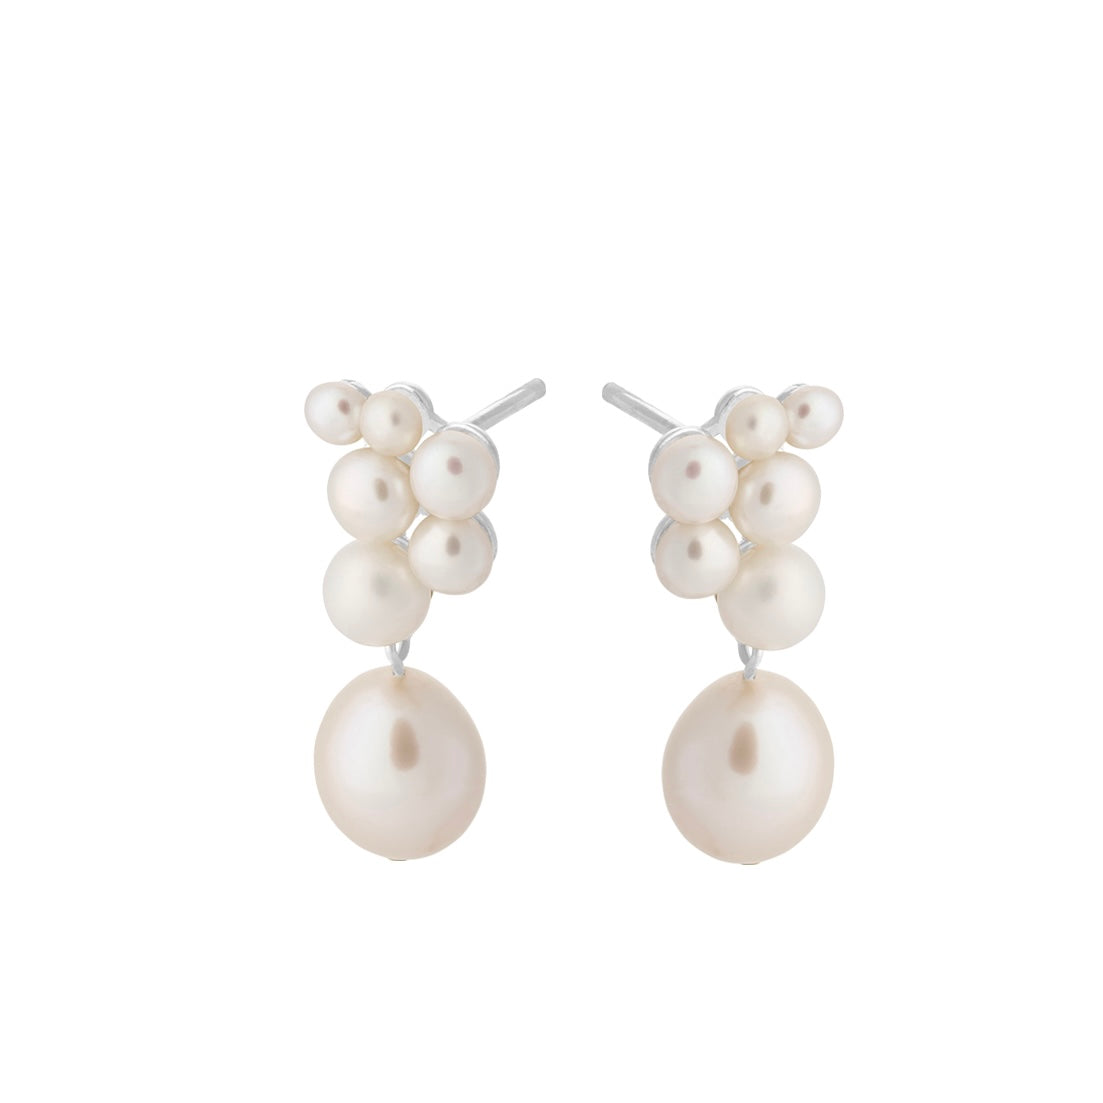 White pearl drop earrings with a cluster of white pearls in differing sizes at the stud on a white background. Ocean Treasure Earsticks by Pernille Corydon at Kirsty Taylor Goldsmiths